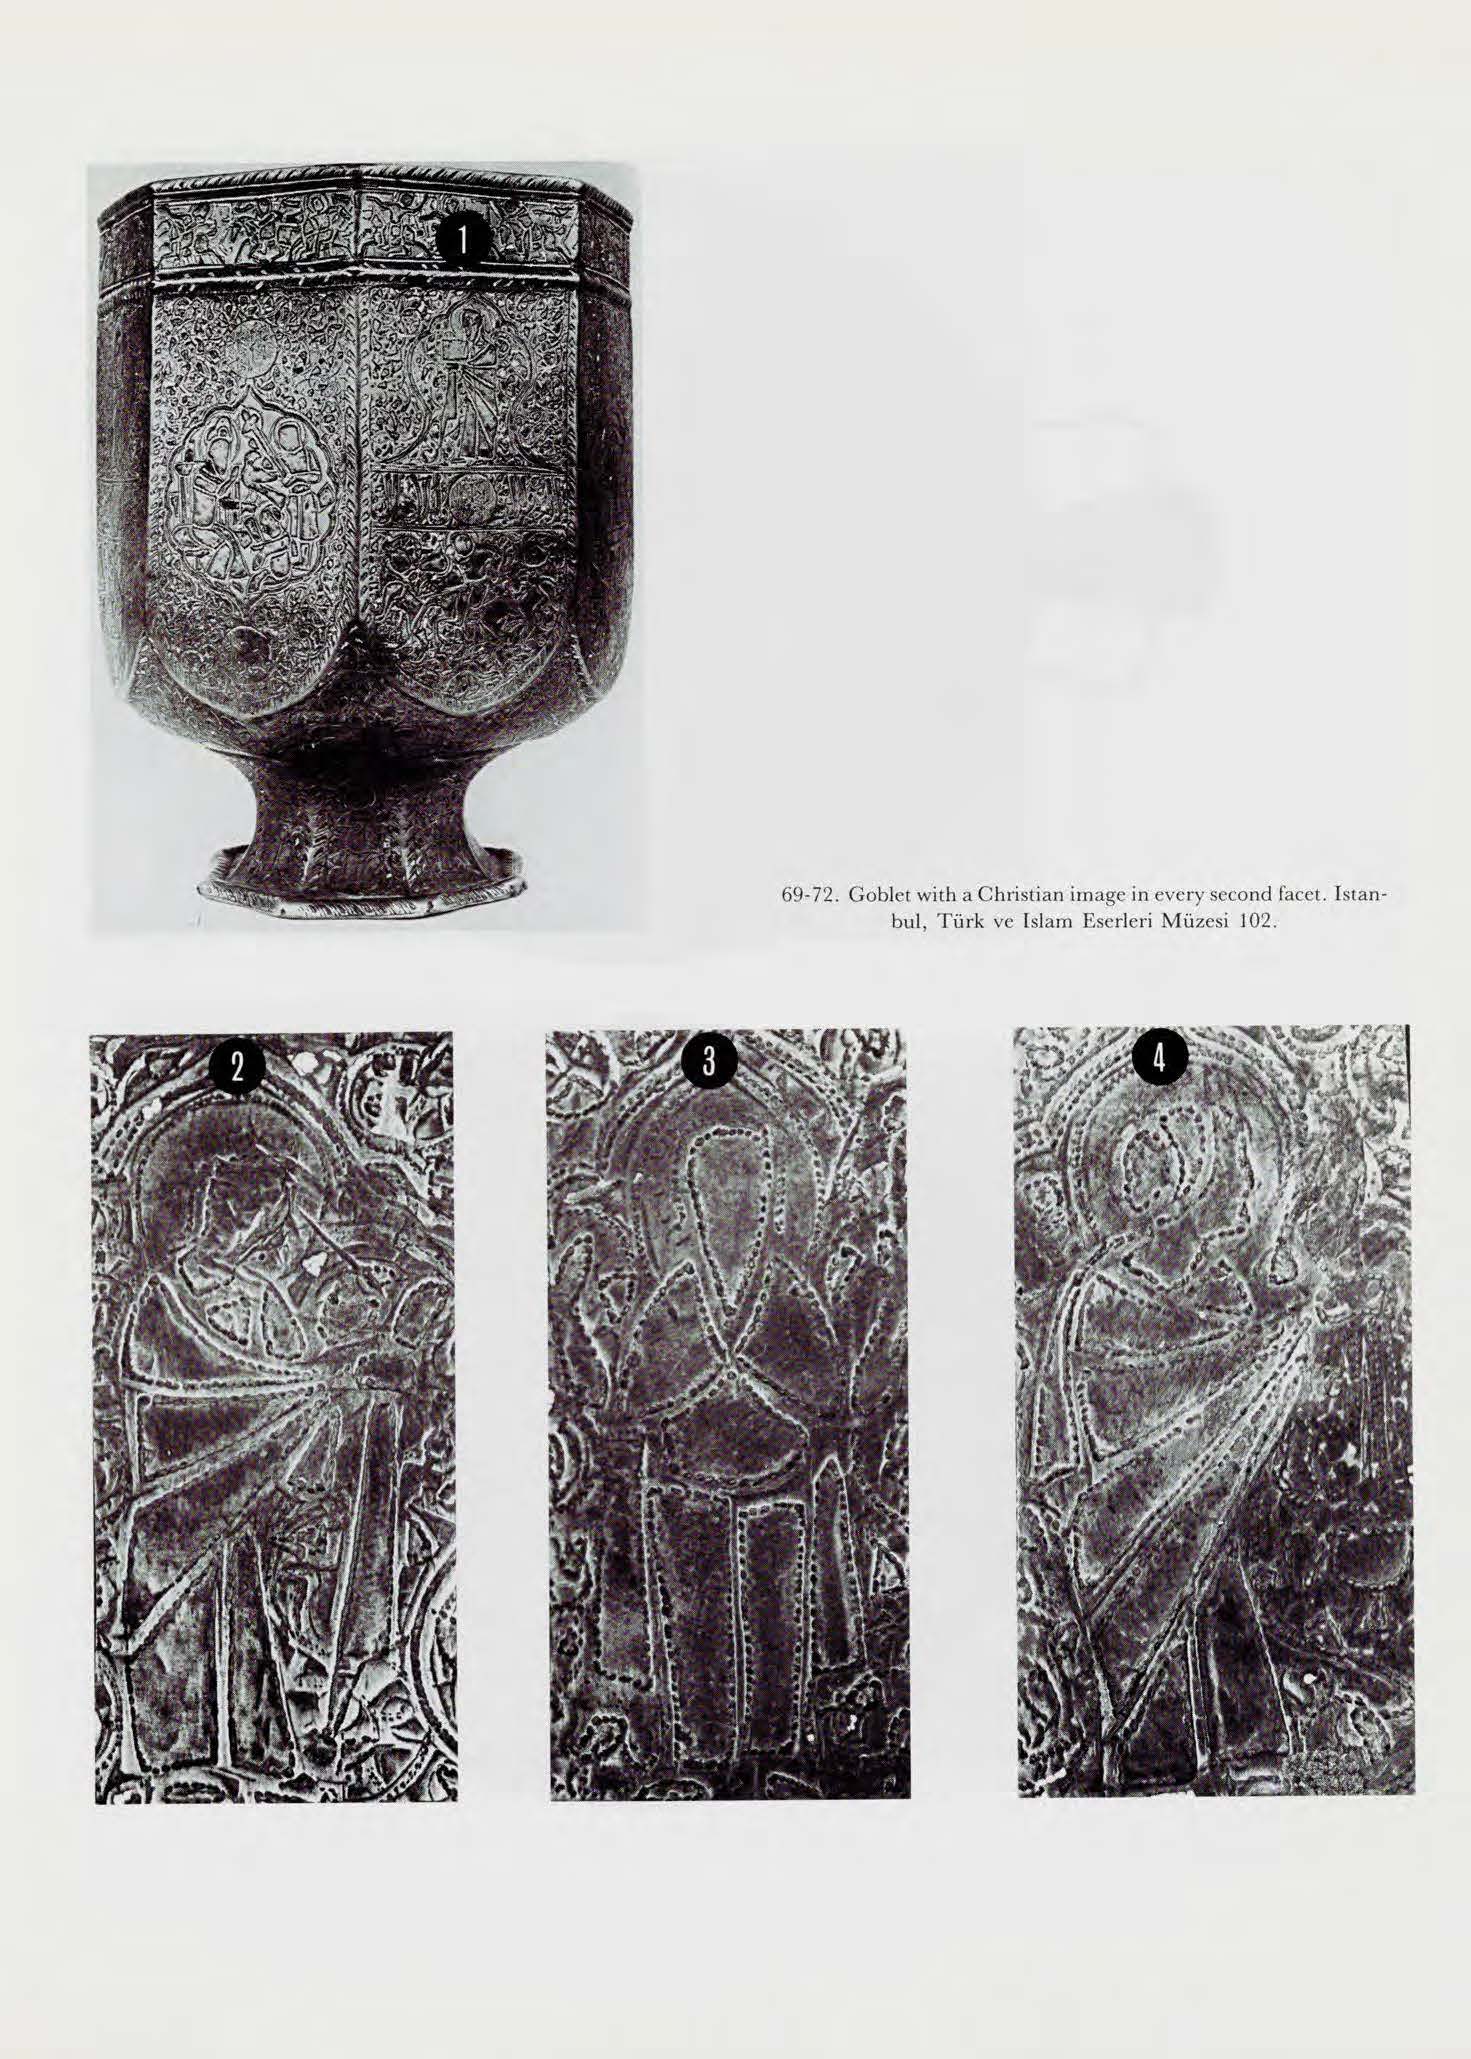 Eva Baer - Second half of illustrative plates from <span style="font-style: italic;">Ayyubid Metalwork with Christian Images</span>.&nbsp;<div><br></div><div><a href="http://archnet.org/publications/13341" target="_blank" data-bypass="true">Text</a><br></div><div><a href="https://archnet.org/publications/13342" target="_blank" data-bypass="true">Plates, Part I</a><br></div>